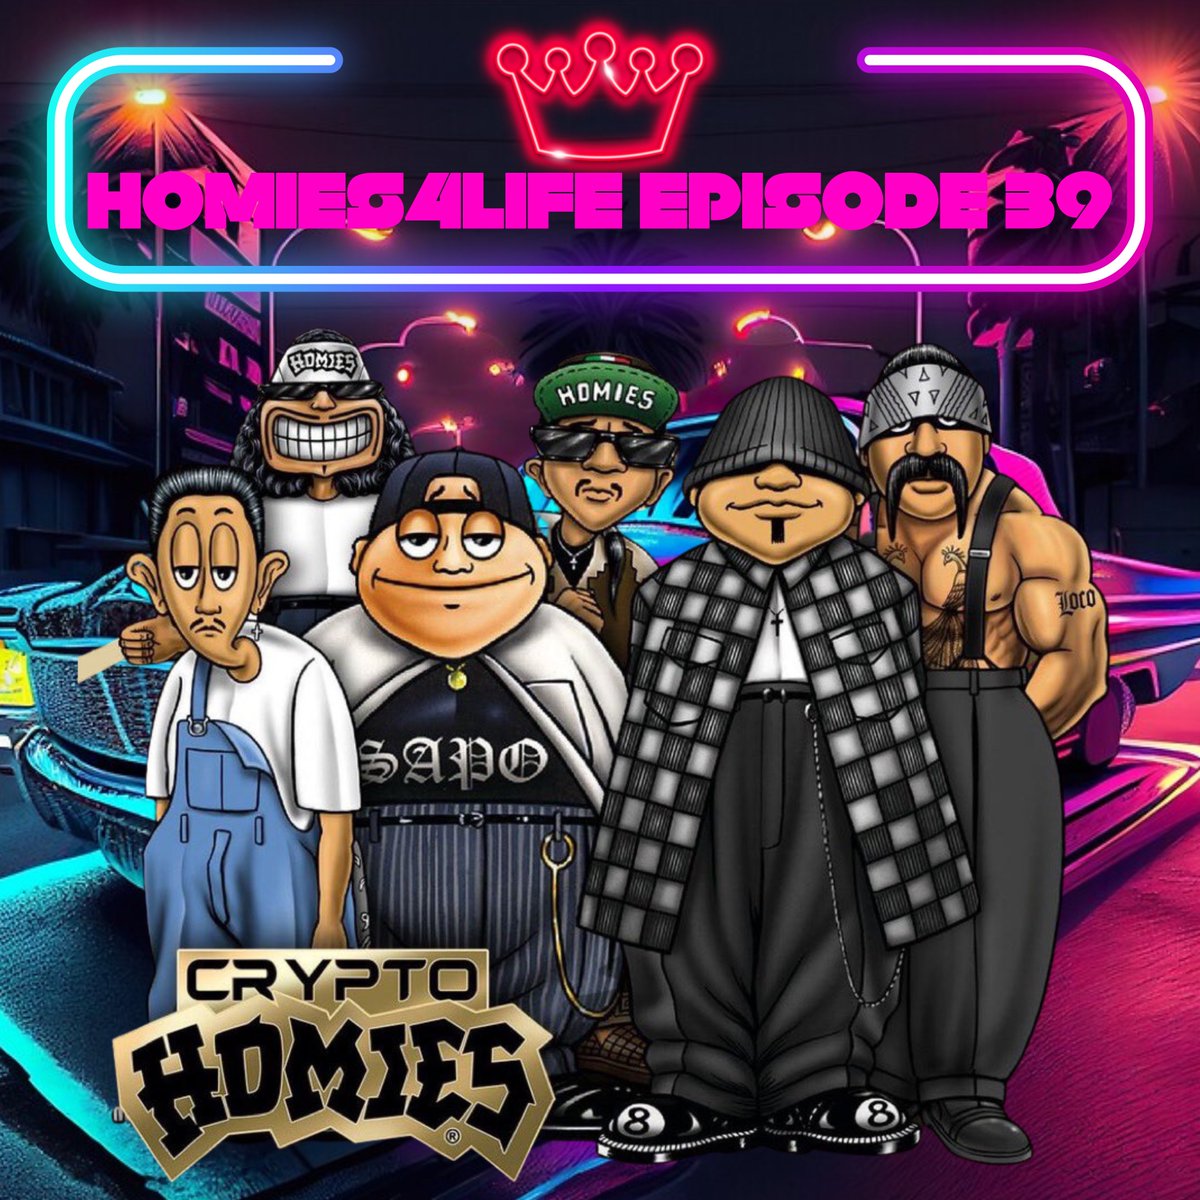 👊#HOMIES4LIFE EPISODE 39👊 🎙️Join @SidneyRichlin for another hour of straight ALPHA with @CRYPTOHOMIES_ @NFA_Inc @vitaltoys and the rest of the Homies! Discord fam👇 👾 discord.gg/cryptohomies Mint your Homies👇 🌐CryptoHomiesClub.io Got 2 do it👇 twitter.com/i/spaces/1rmGP…